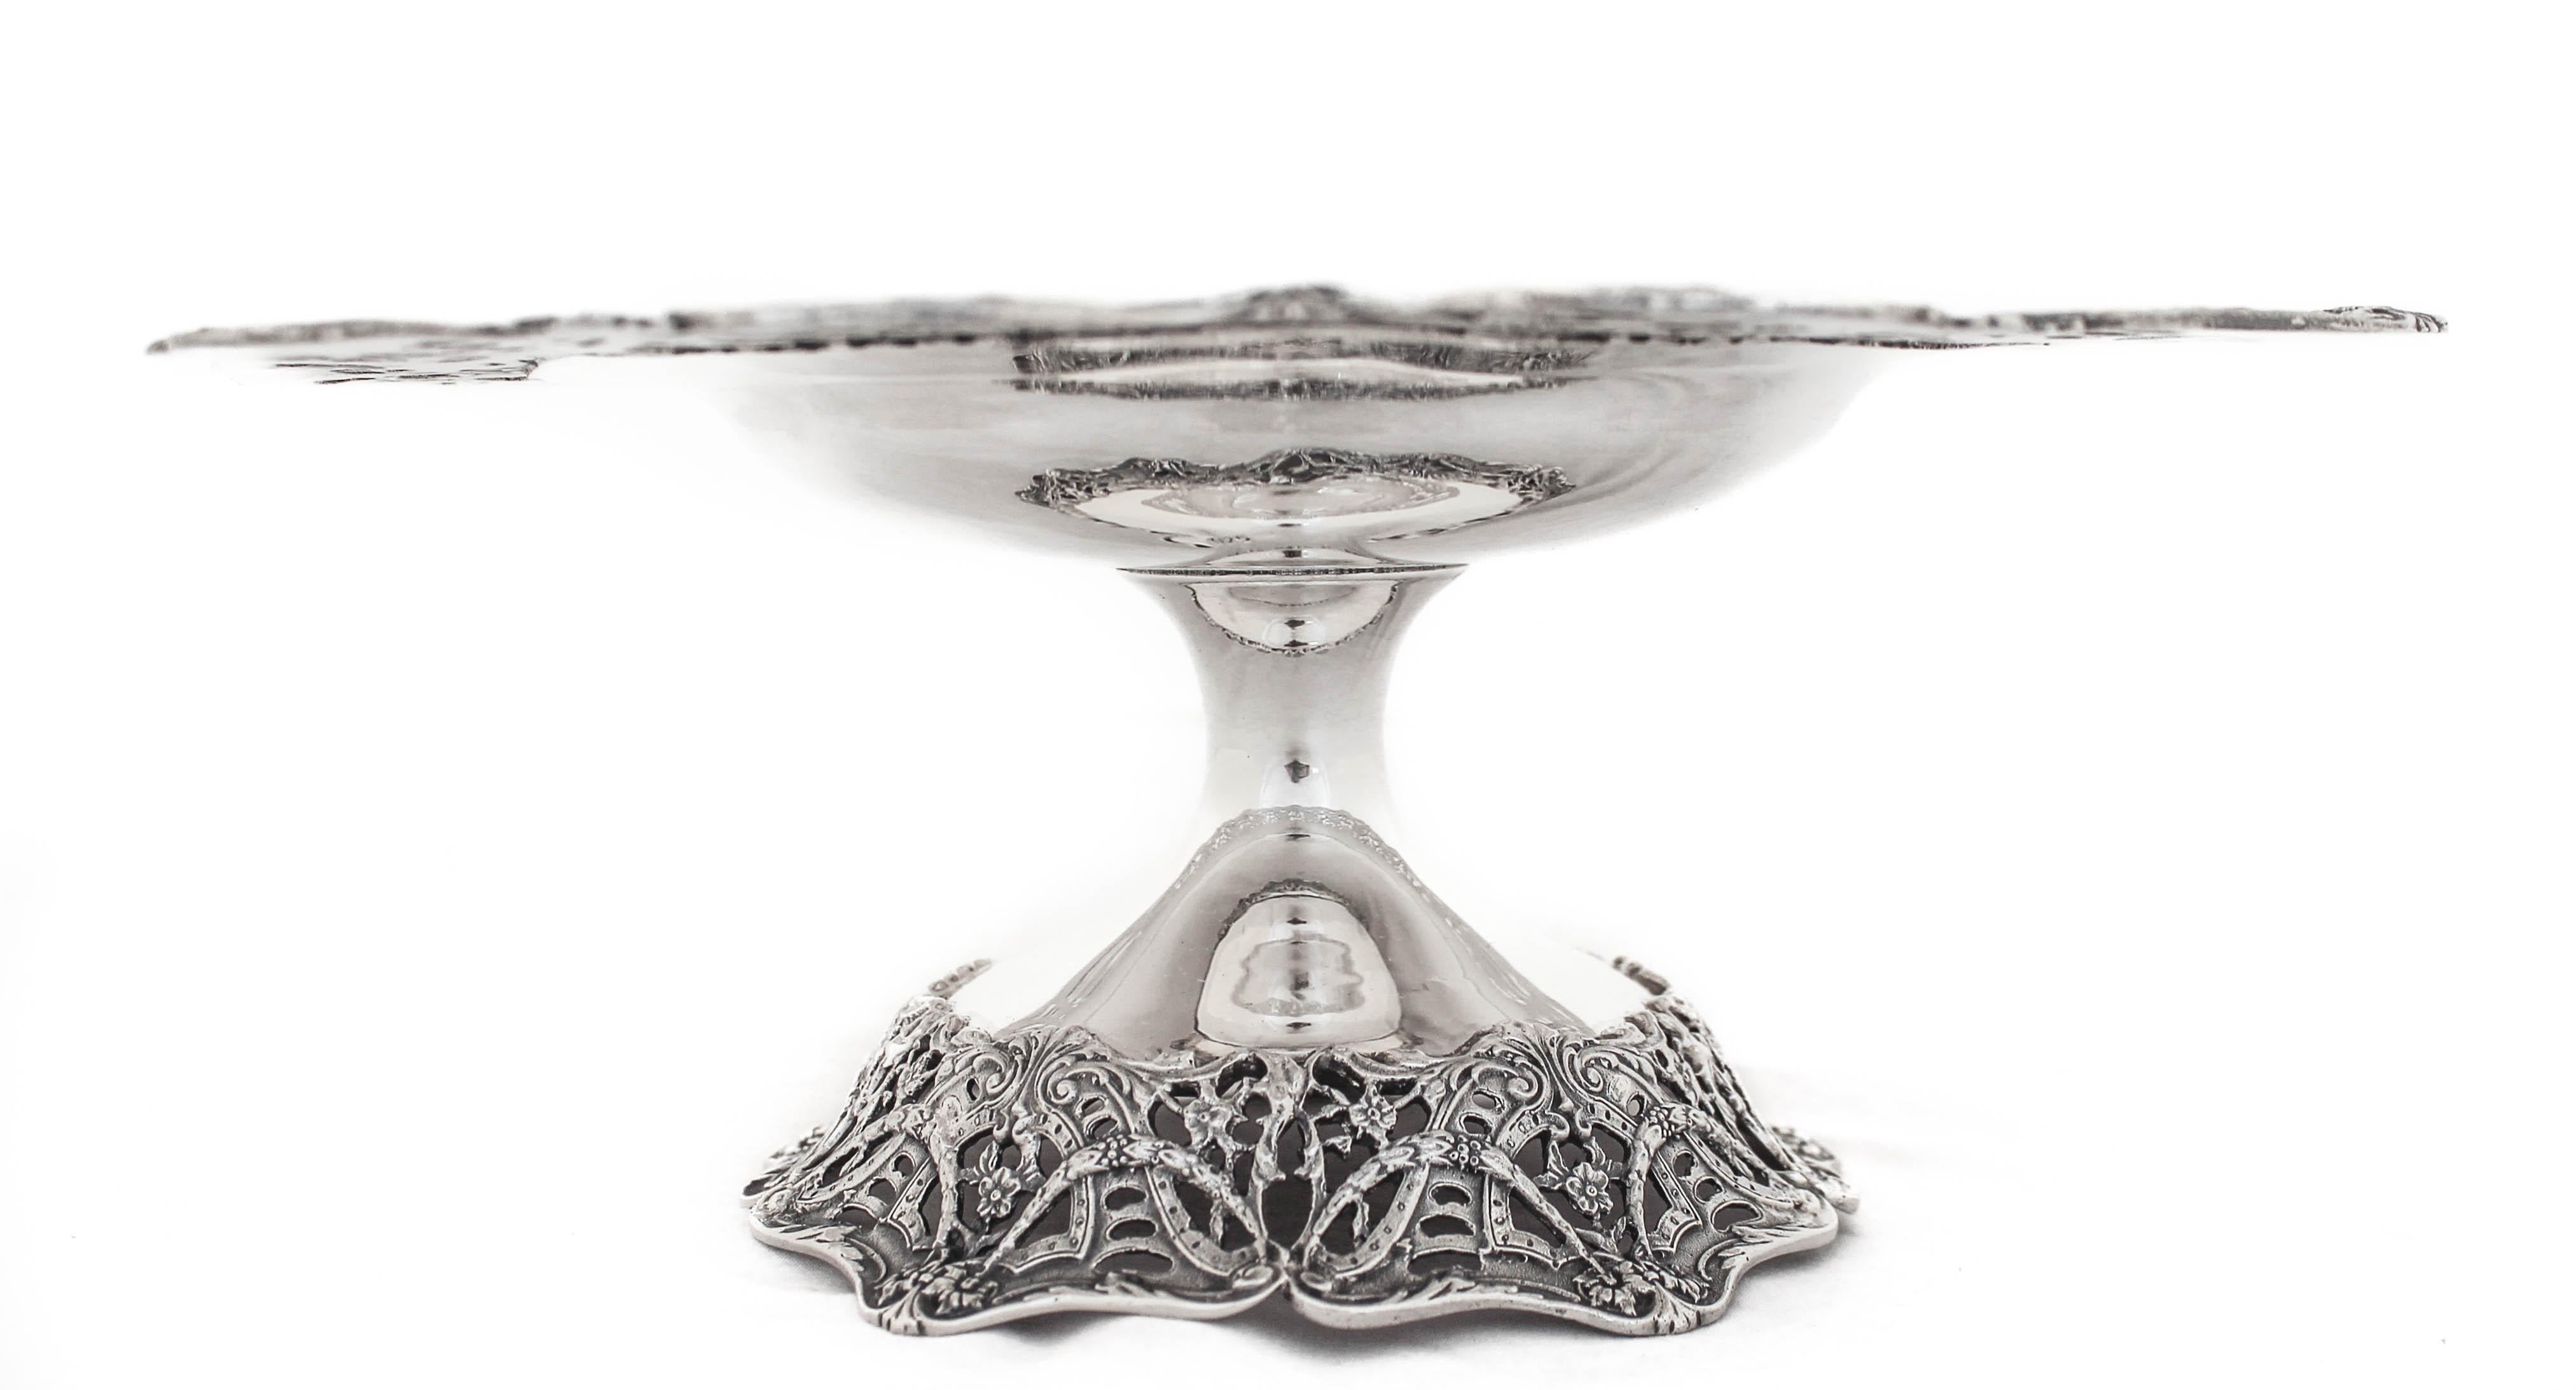 Being offered is a large sterling silver tazza.  It has an old-world pattern going around the scalloped edge and base.  Wreaths, flowers and bows come together in an elaborate feast for the eyes.  The center is curved; more of a bowl than a flat